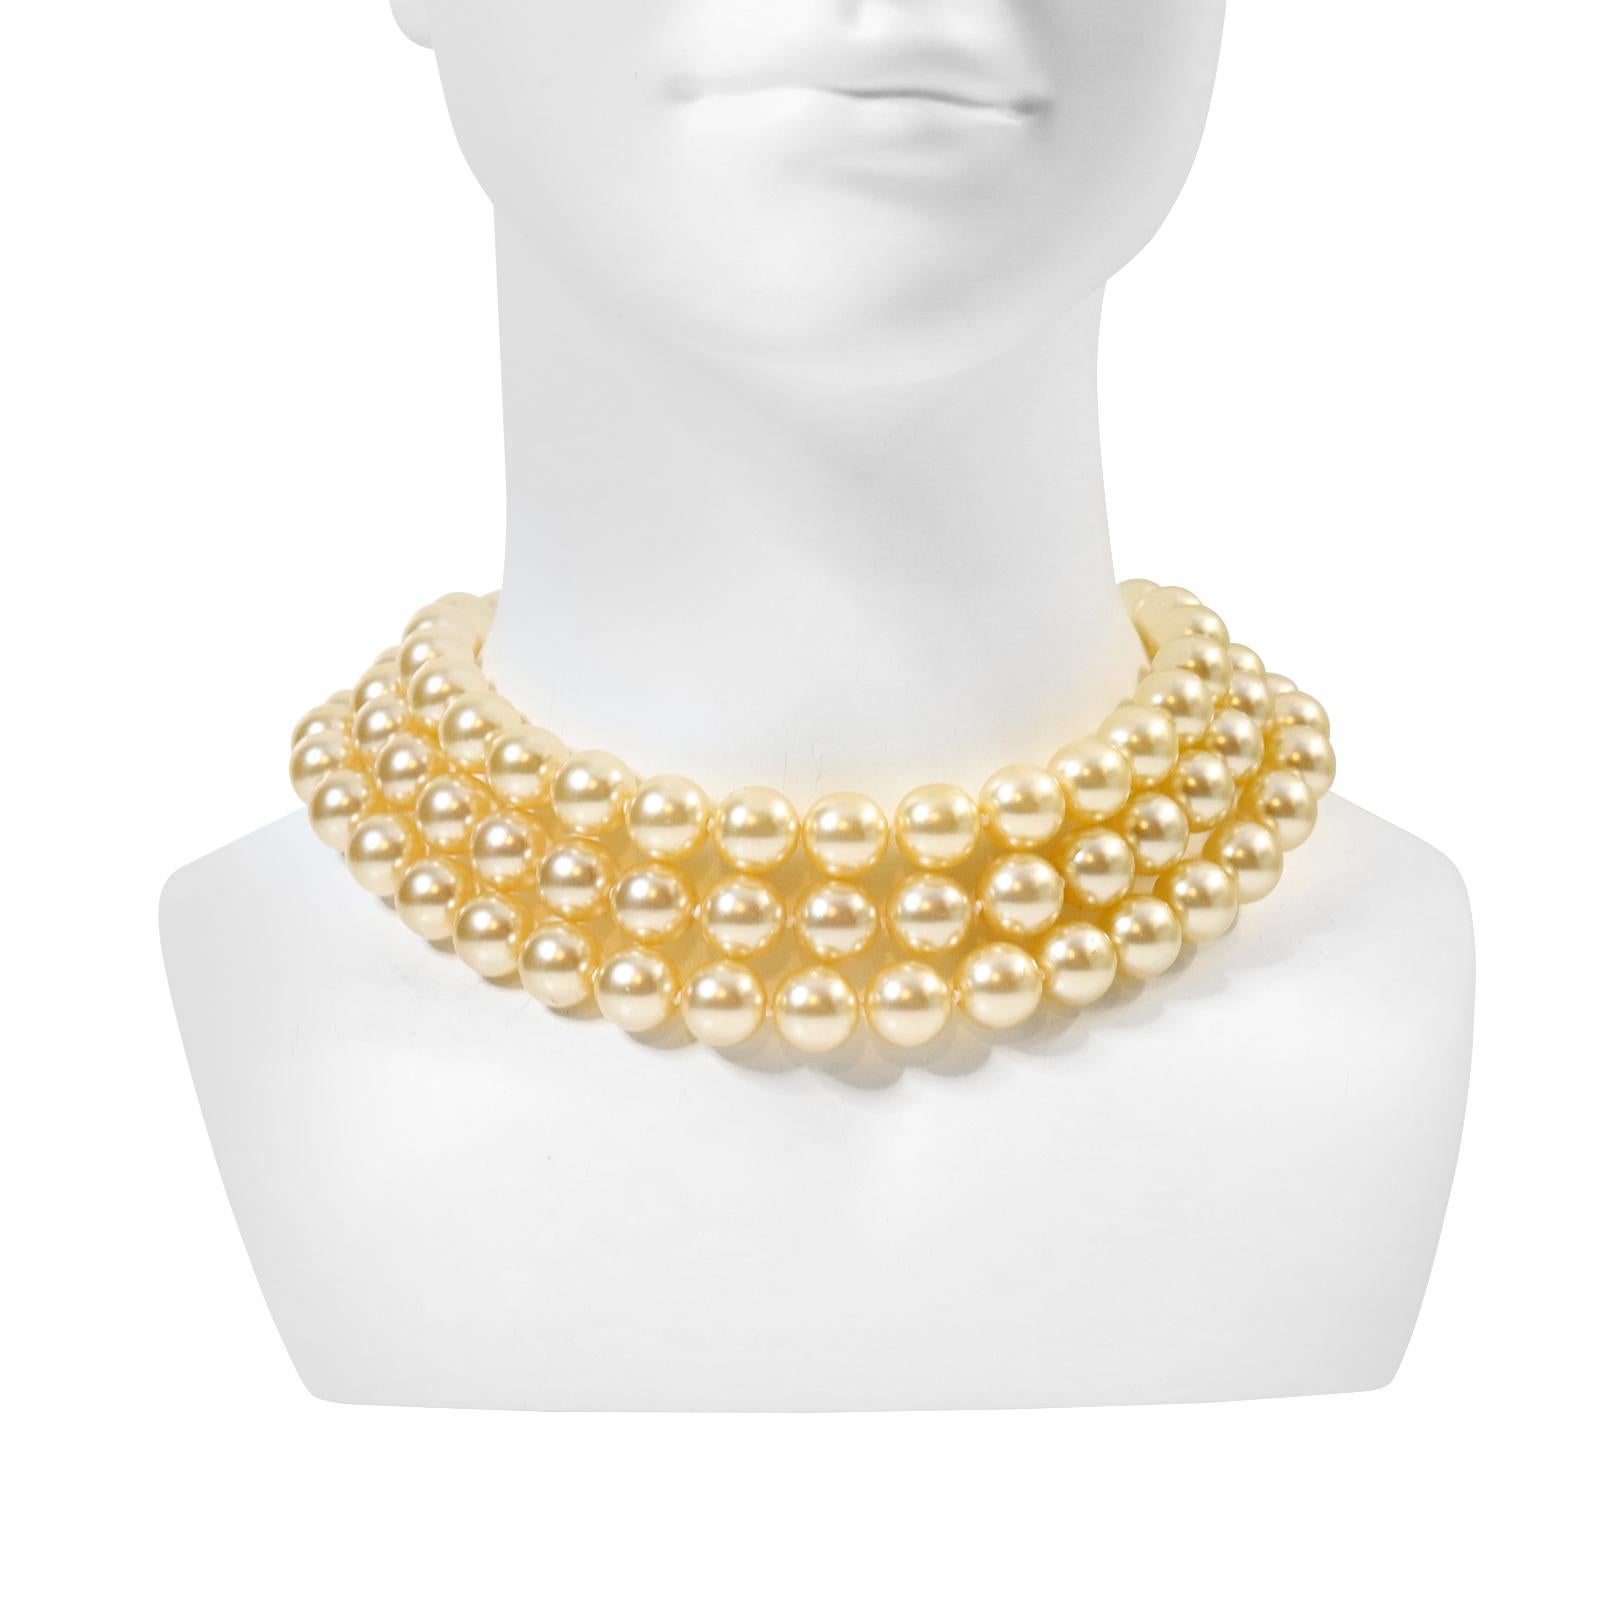 Vintage French Single Strand of Faux Pearls Necklace Circa 1980s For Sale 1